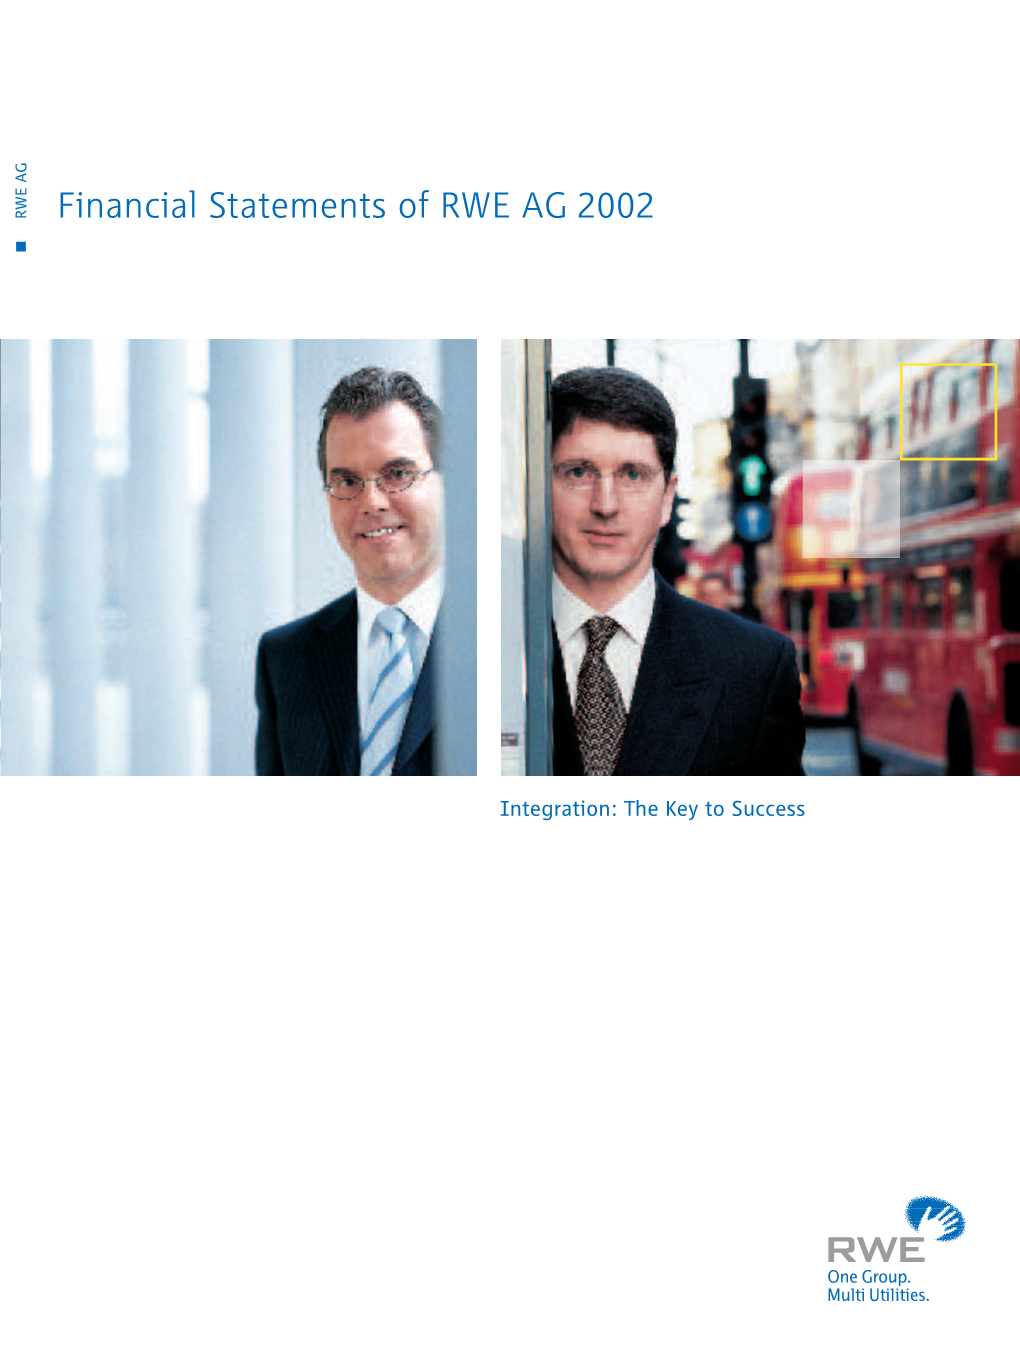 Financial Statements of RWE AG 2002